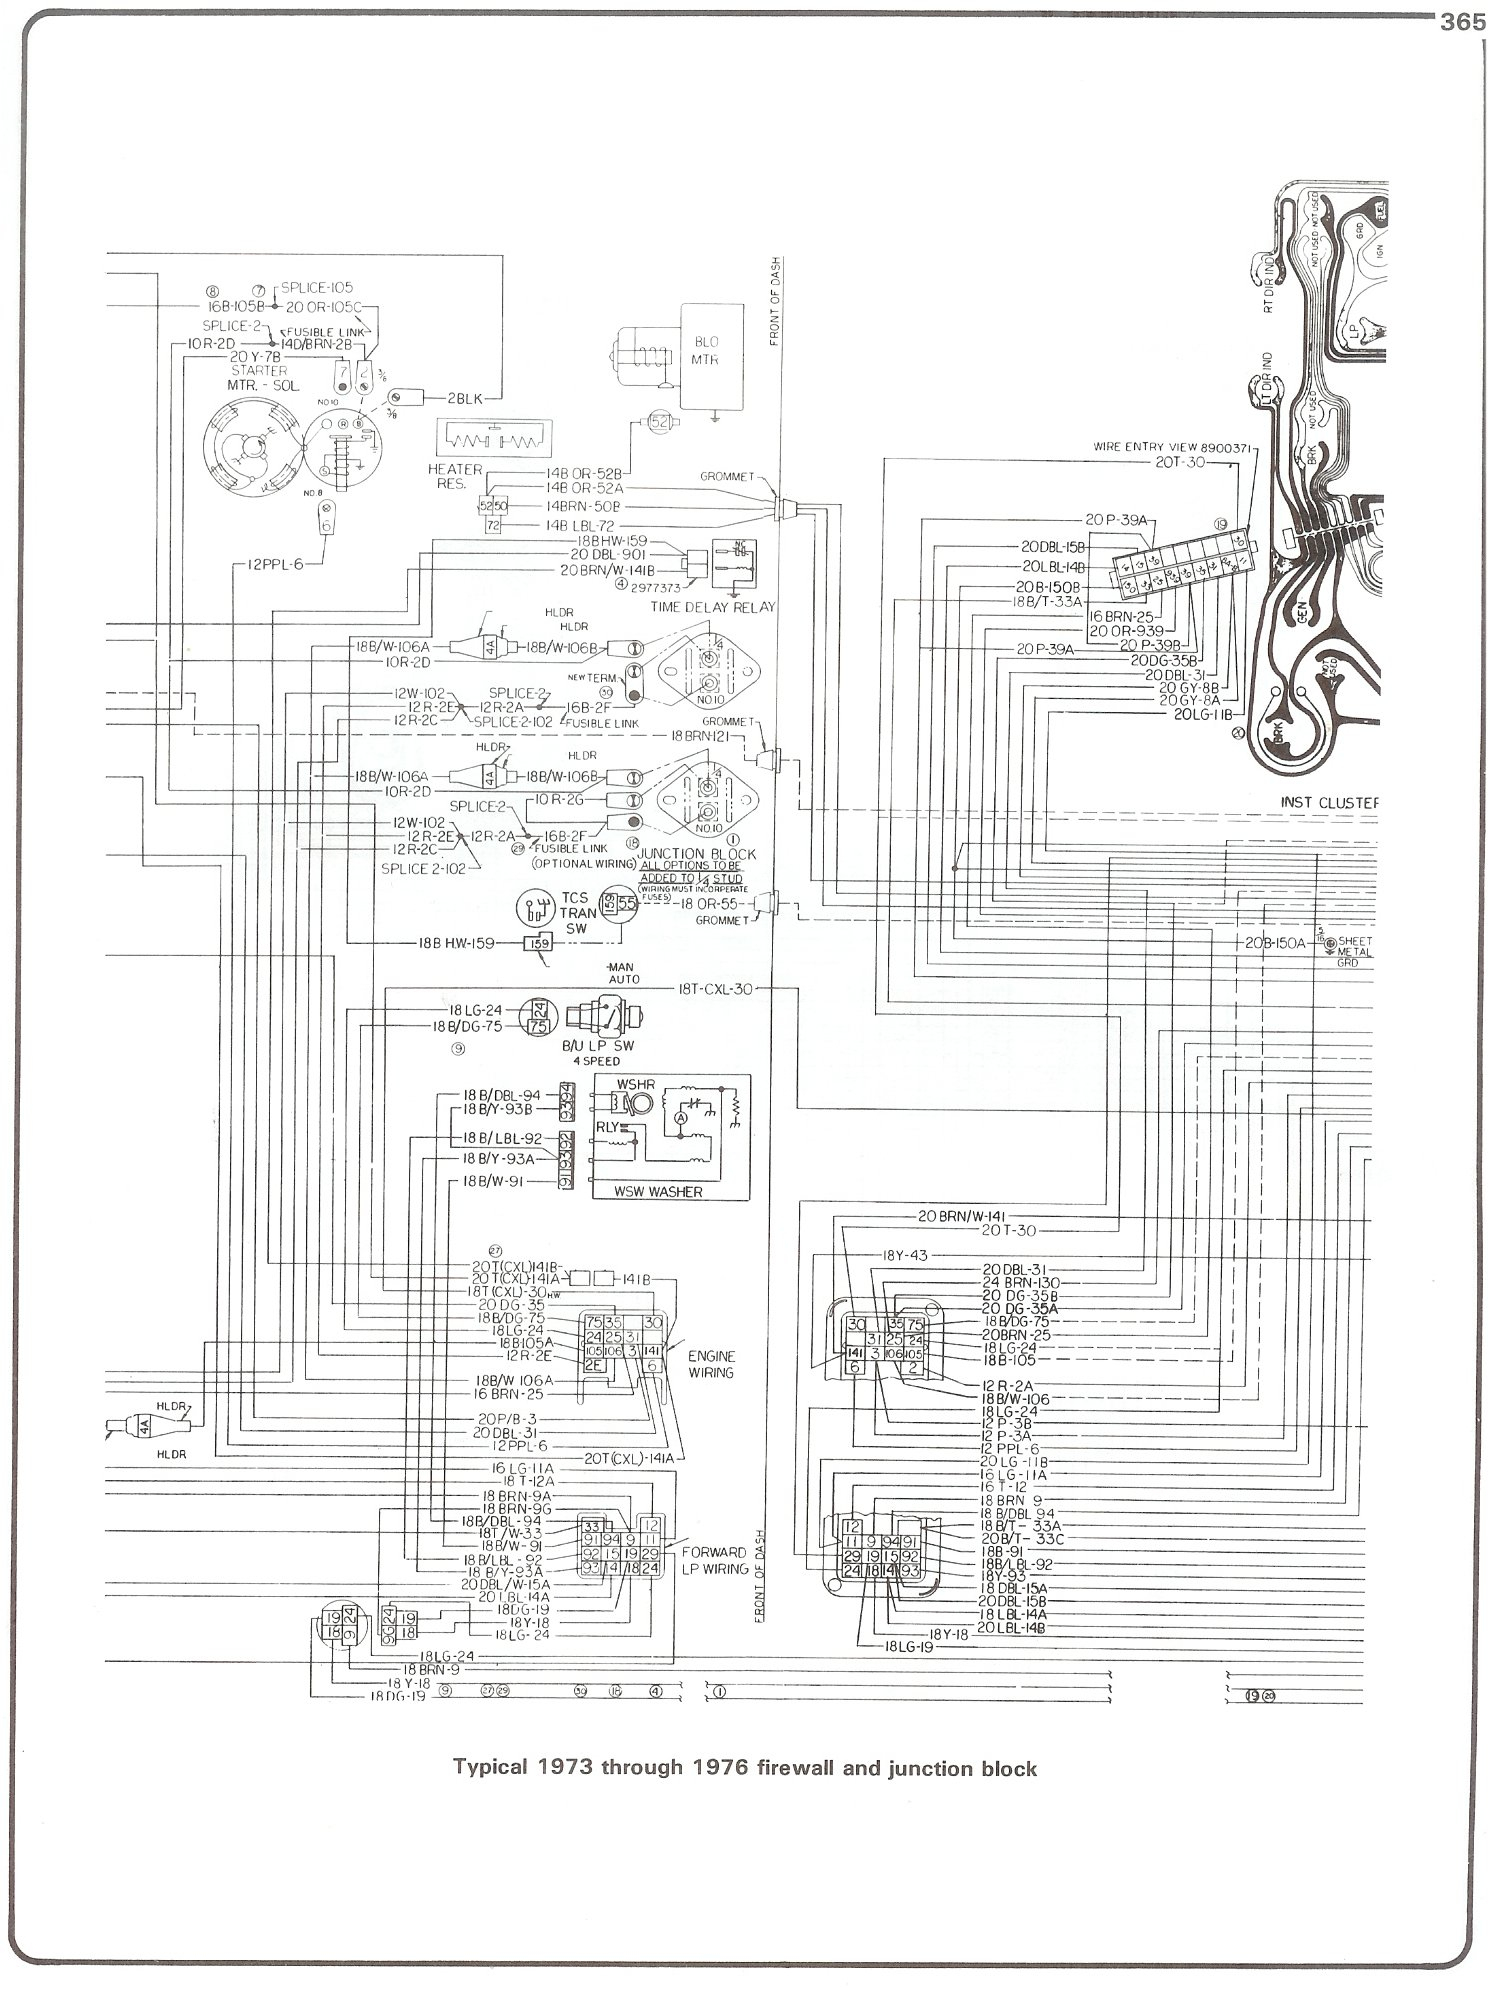 Wiring Diagram 1978 Chevy Pickup | Manual E-Books - 1978 Chevy Truck Wiring Diagram